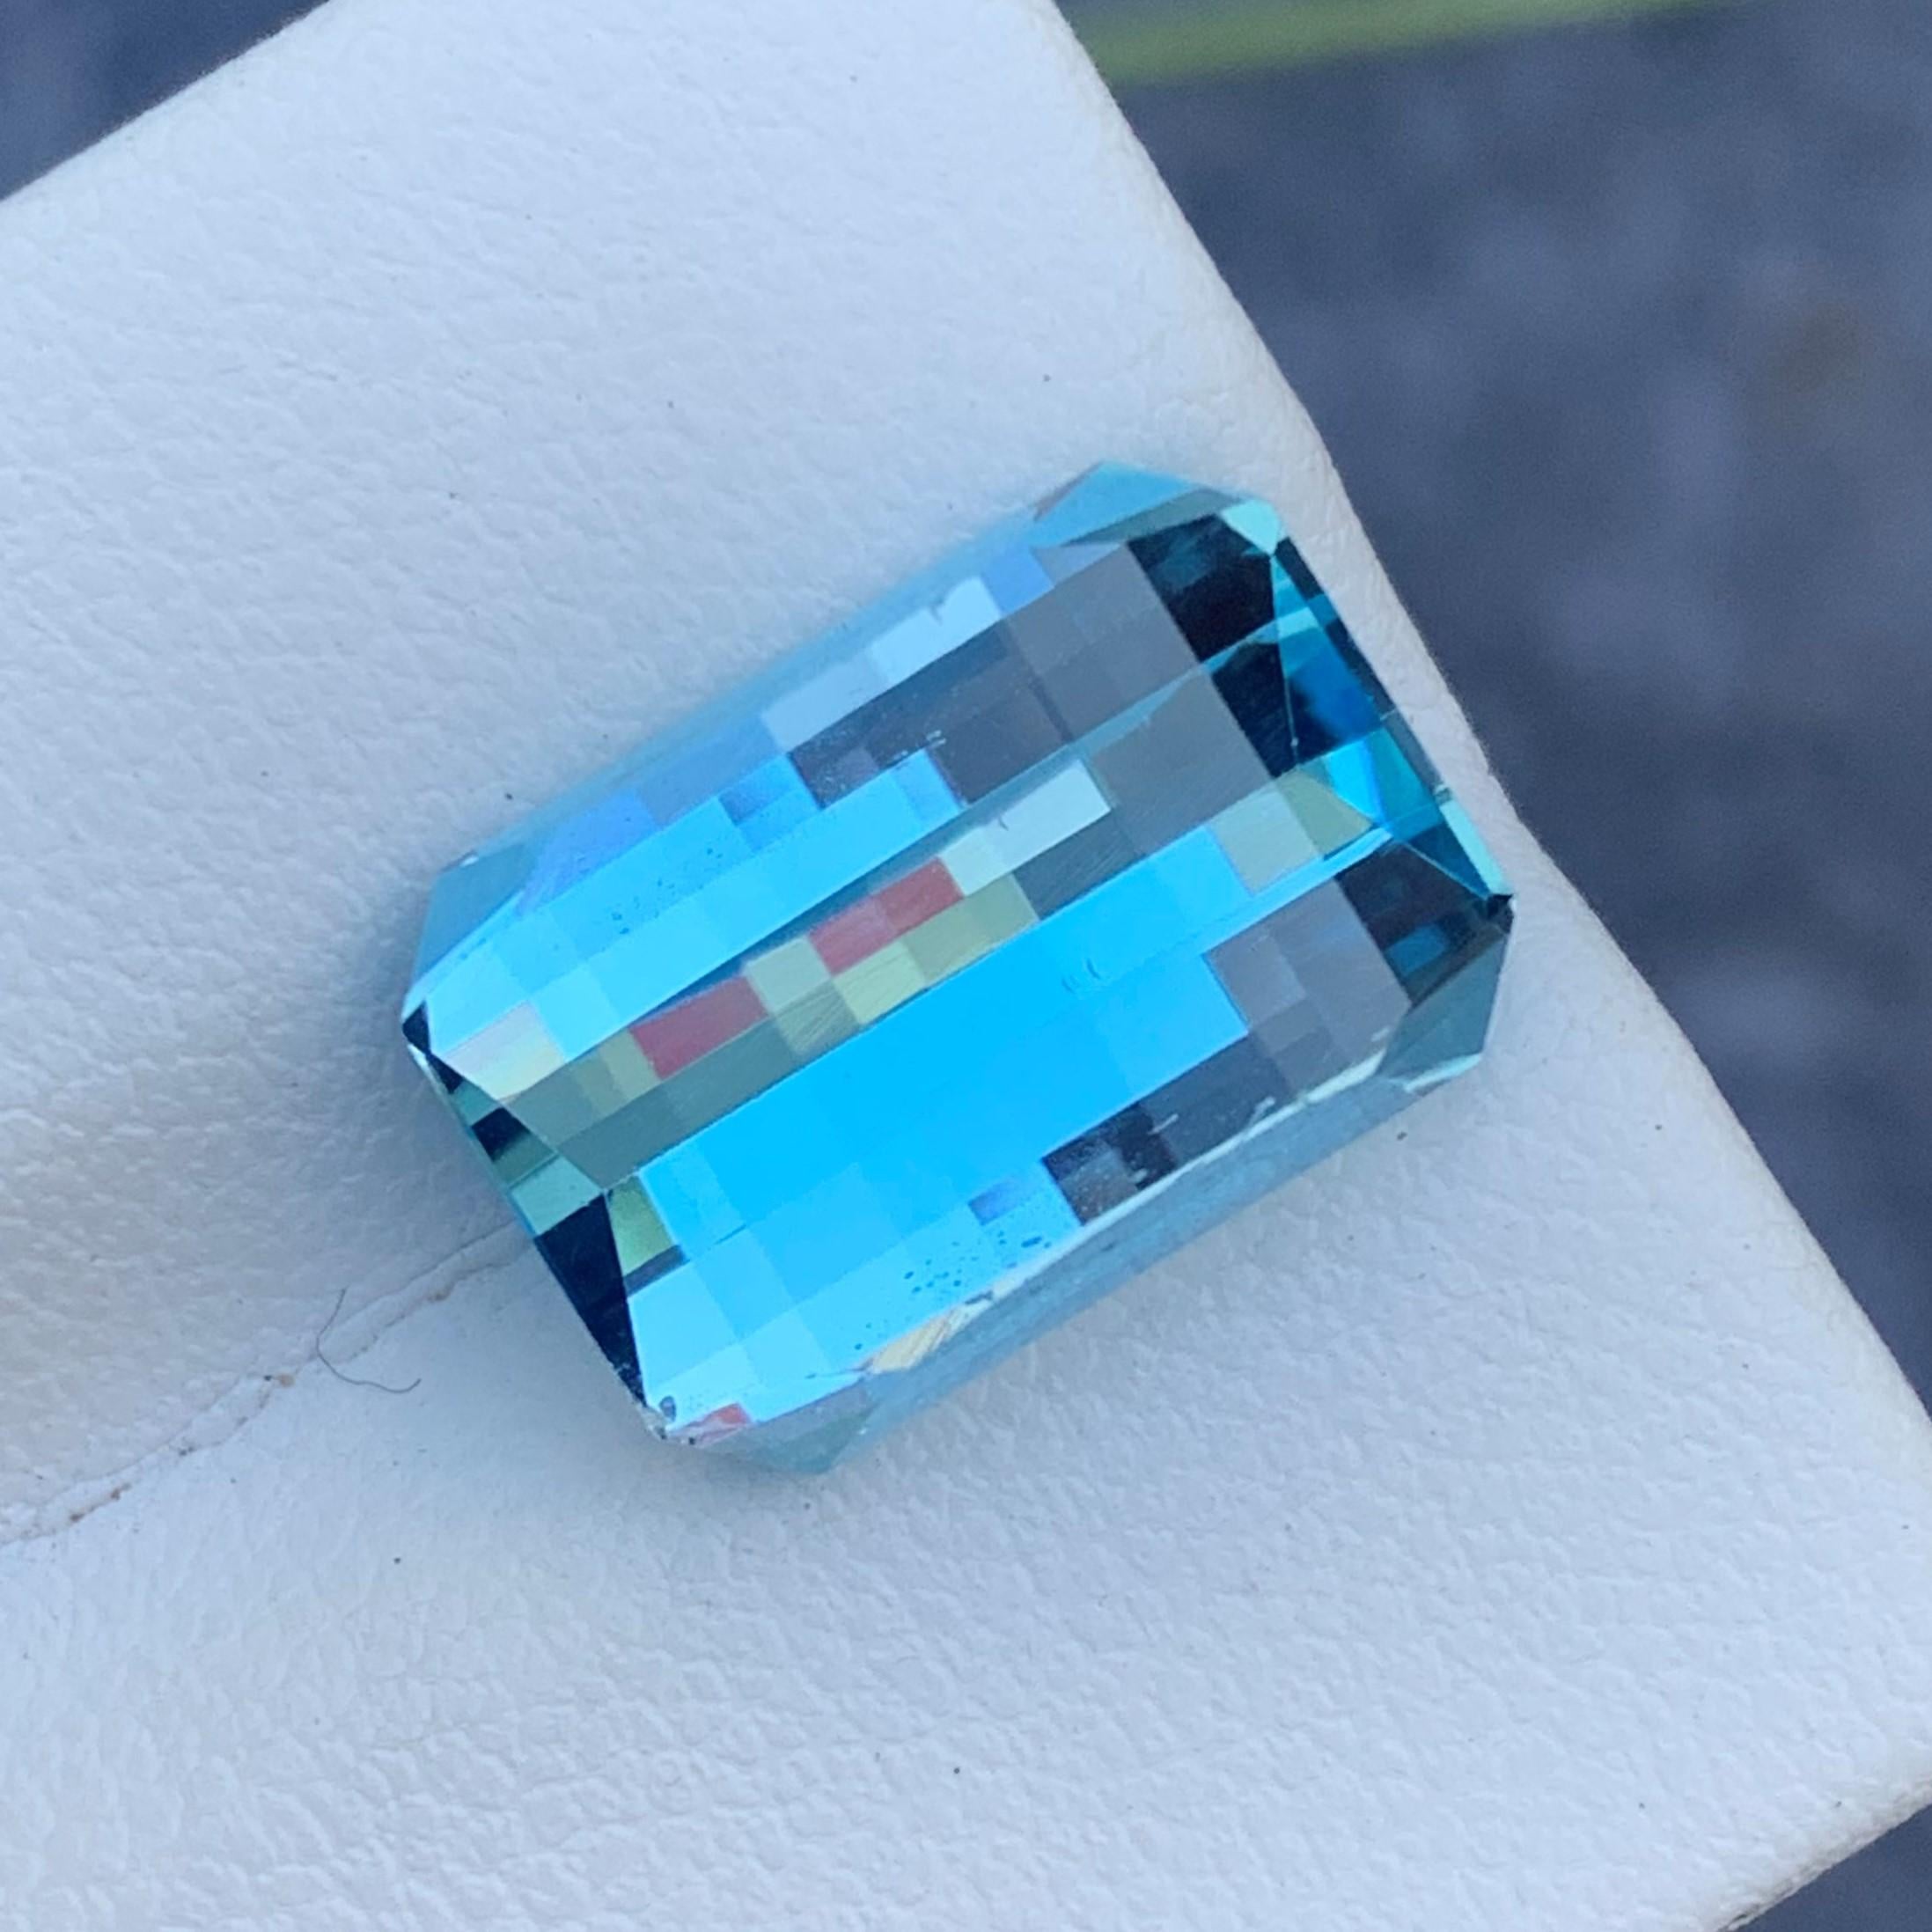 Faceted Sky Blue Topaz 
Weight : 10.45 Carats
Dimensions : 14.1x9.8x7.5 Mm
Origin : Brazil
Clarity : Eye Clean
Shape: Pixel Cut
Color: Blue
Certificate: On Demand
.
Blue Topaz Metaphysical Properties
Blue topaz, in particular, is believed to promote